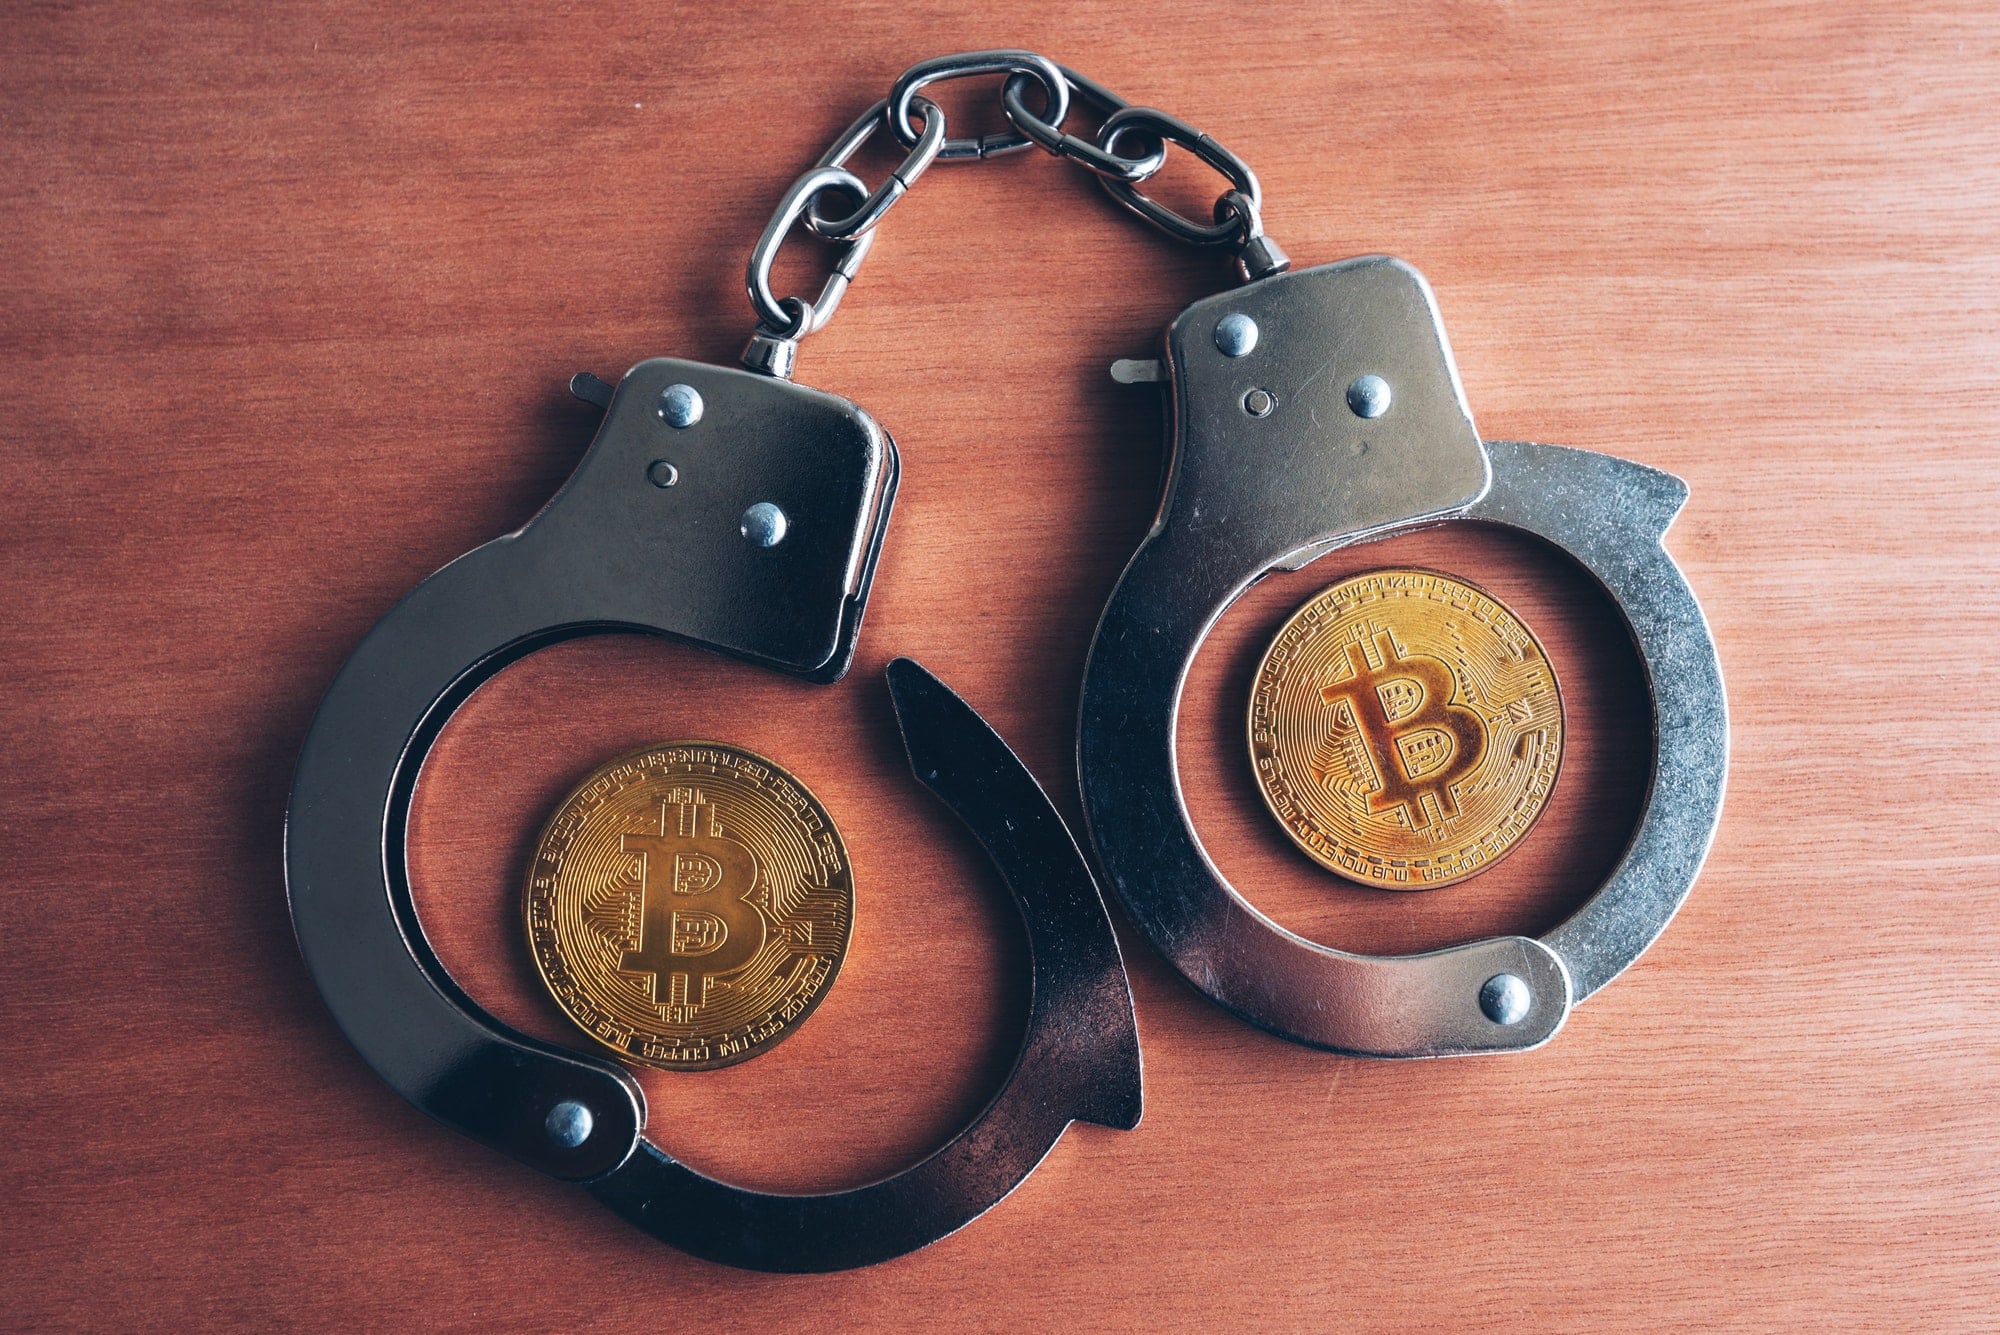 9.5 Billion TL Cryptocurrency Operation Based in Aydın: 9 People Detained!